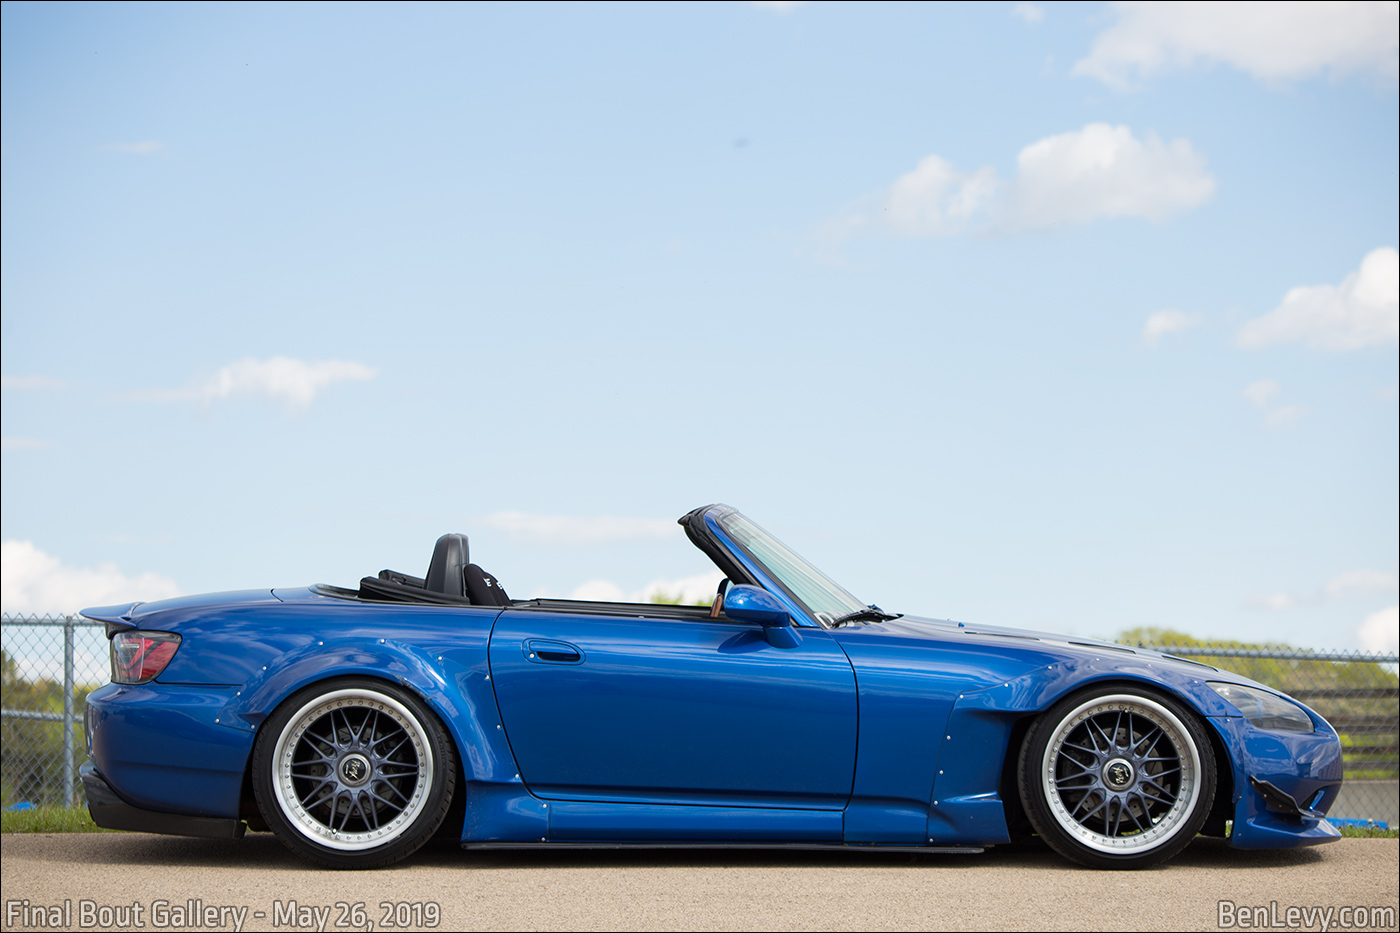 Widebody Honda S2000 with the Top Down